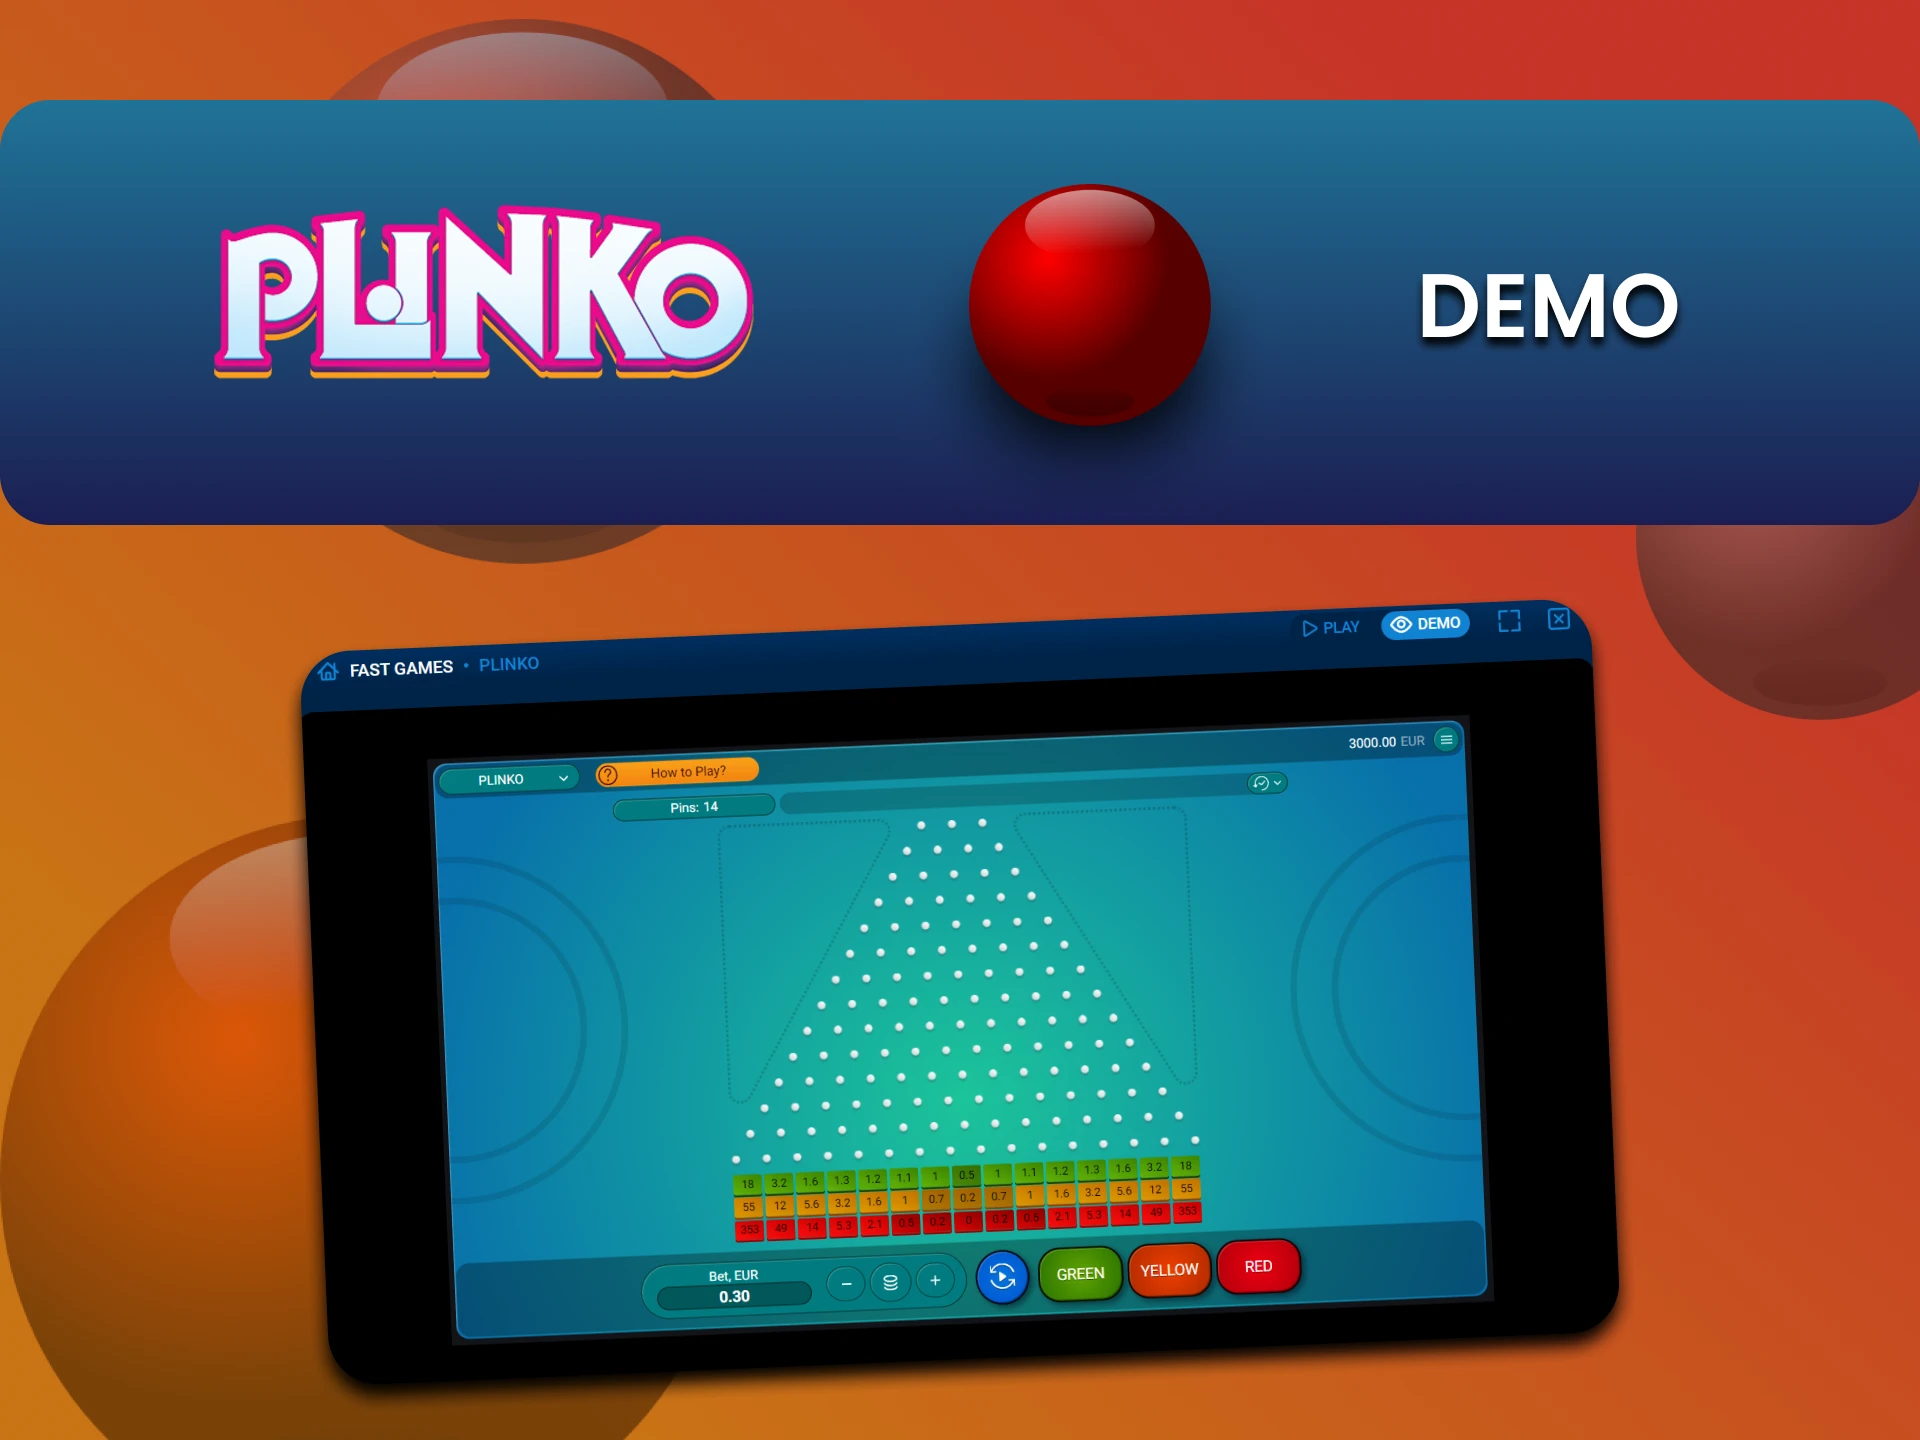 Plinko has a demo version of the game for practice.